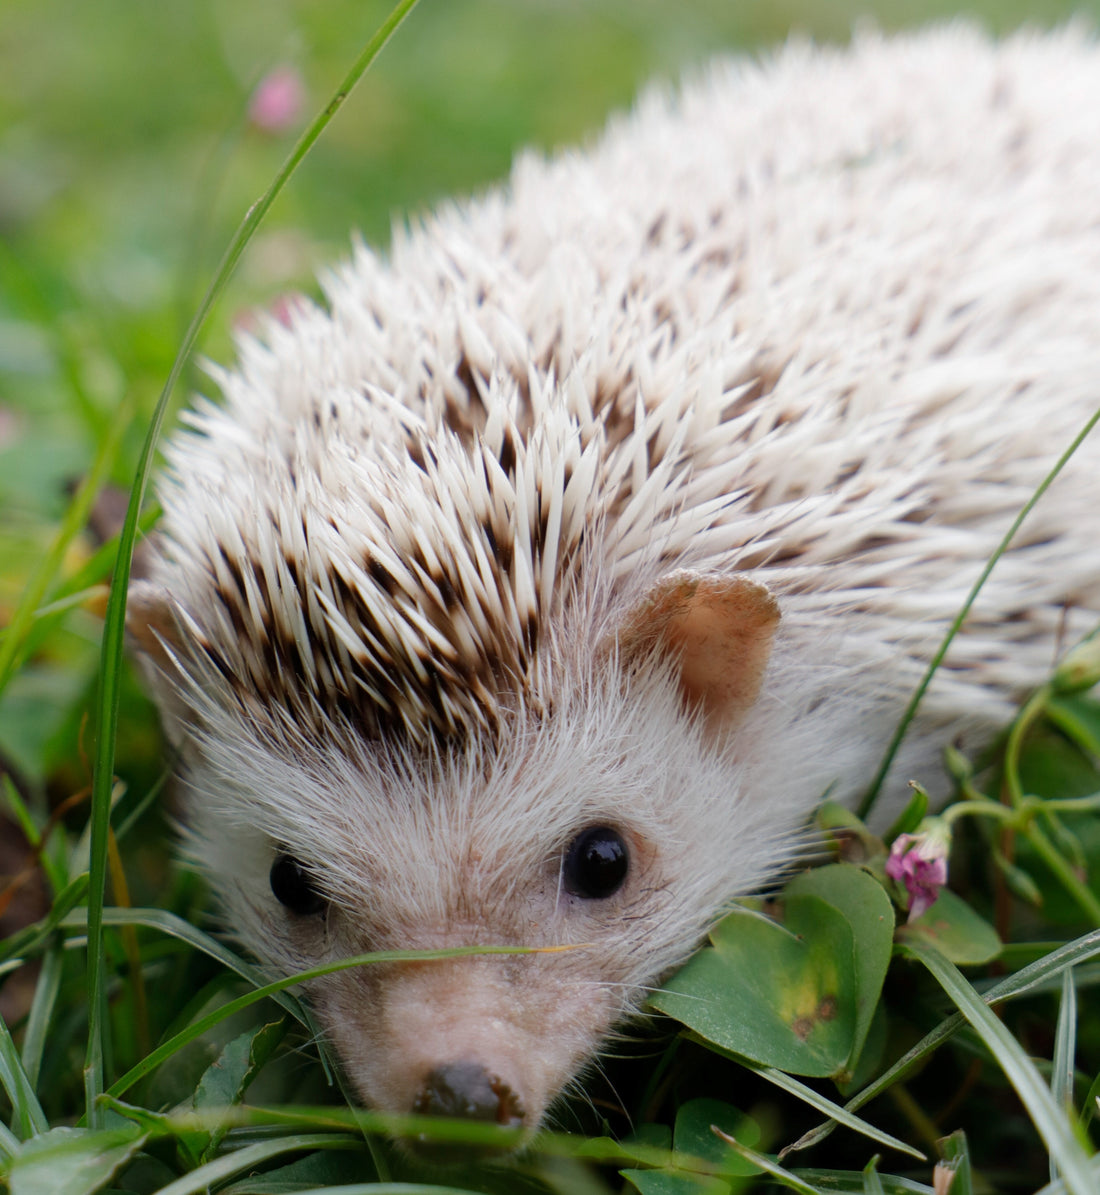 Can Hedgehogs Live Together in Groups?